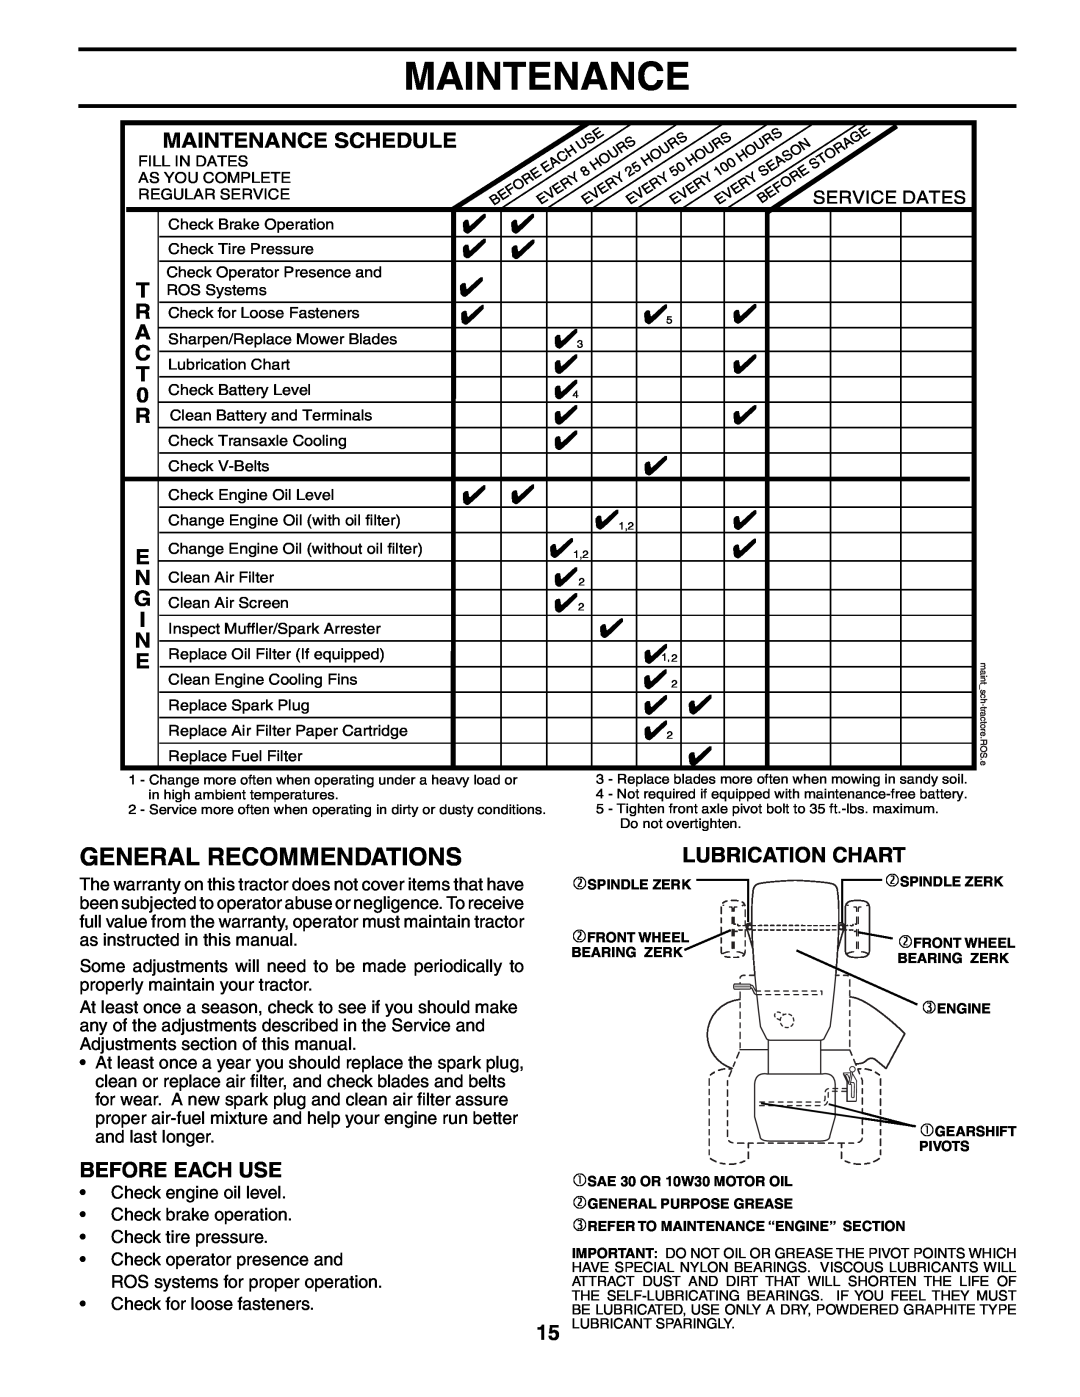 Poulan PK1942YT manual General Recommendations, Before Each Use, Lubrication Chart, Maintenance Schedule 